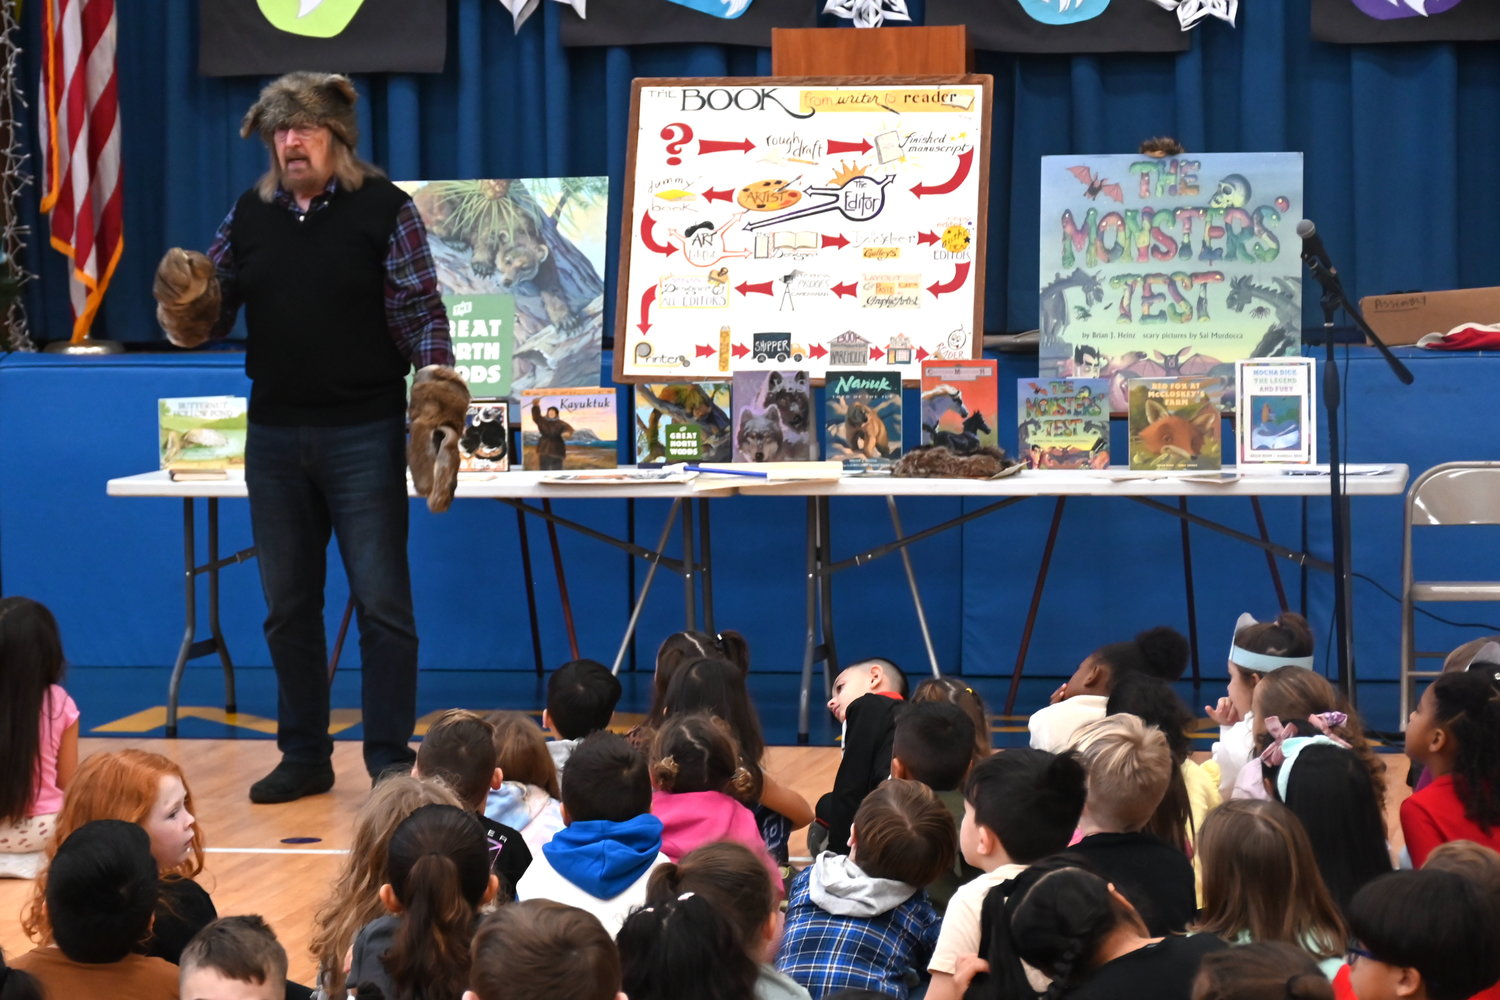 Students at Francis X. Hegarty school pay close attention to local author Brian Heinz, author of “The Great North Woods” and “Adirondack Lullaby.”